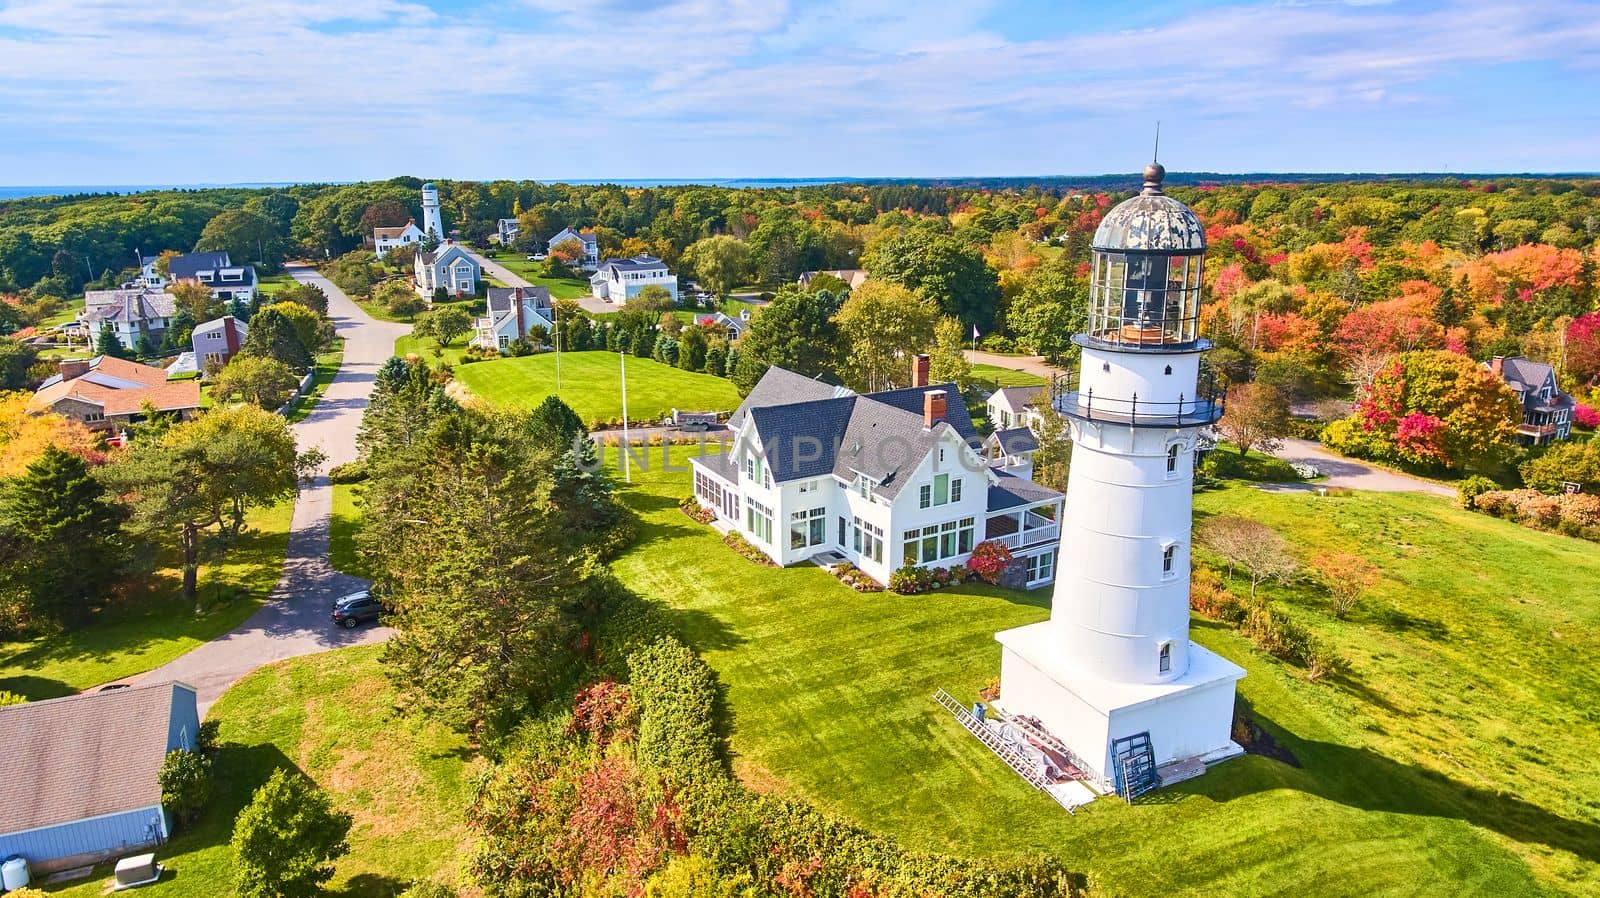 Image of Homes and fall forest surround pair of Maine Lighthouses on ocean